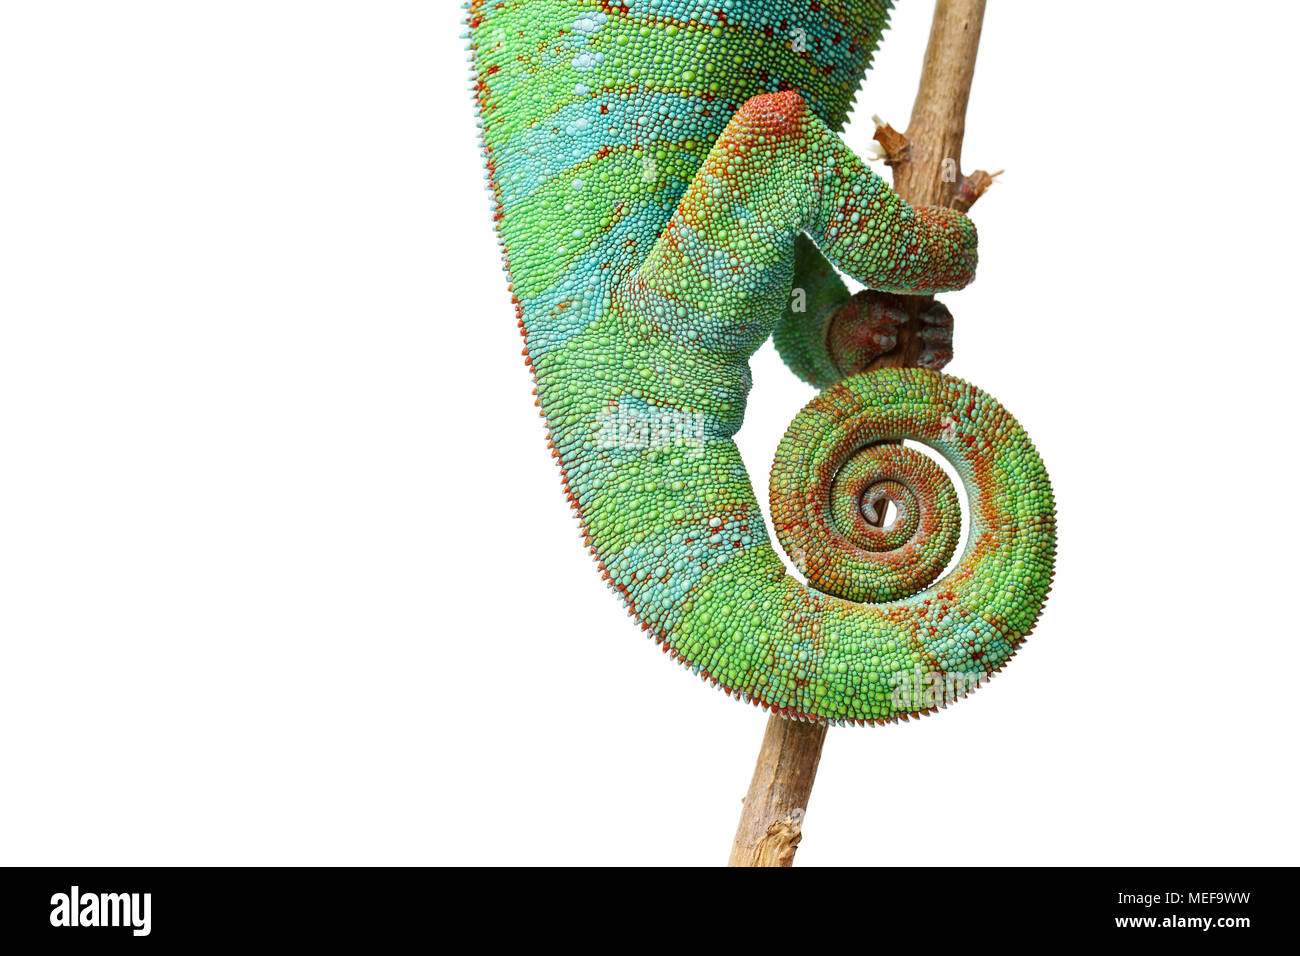 alive chameleon reptile sitting on branch. macro studio shot of reptile tail isolated on white background. copy space. Stock Photo